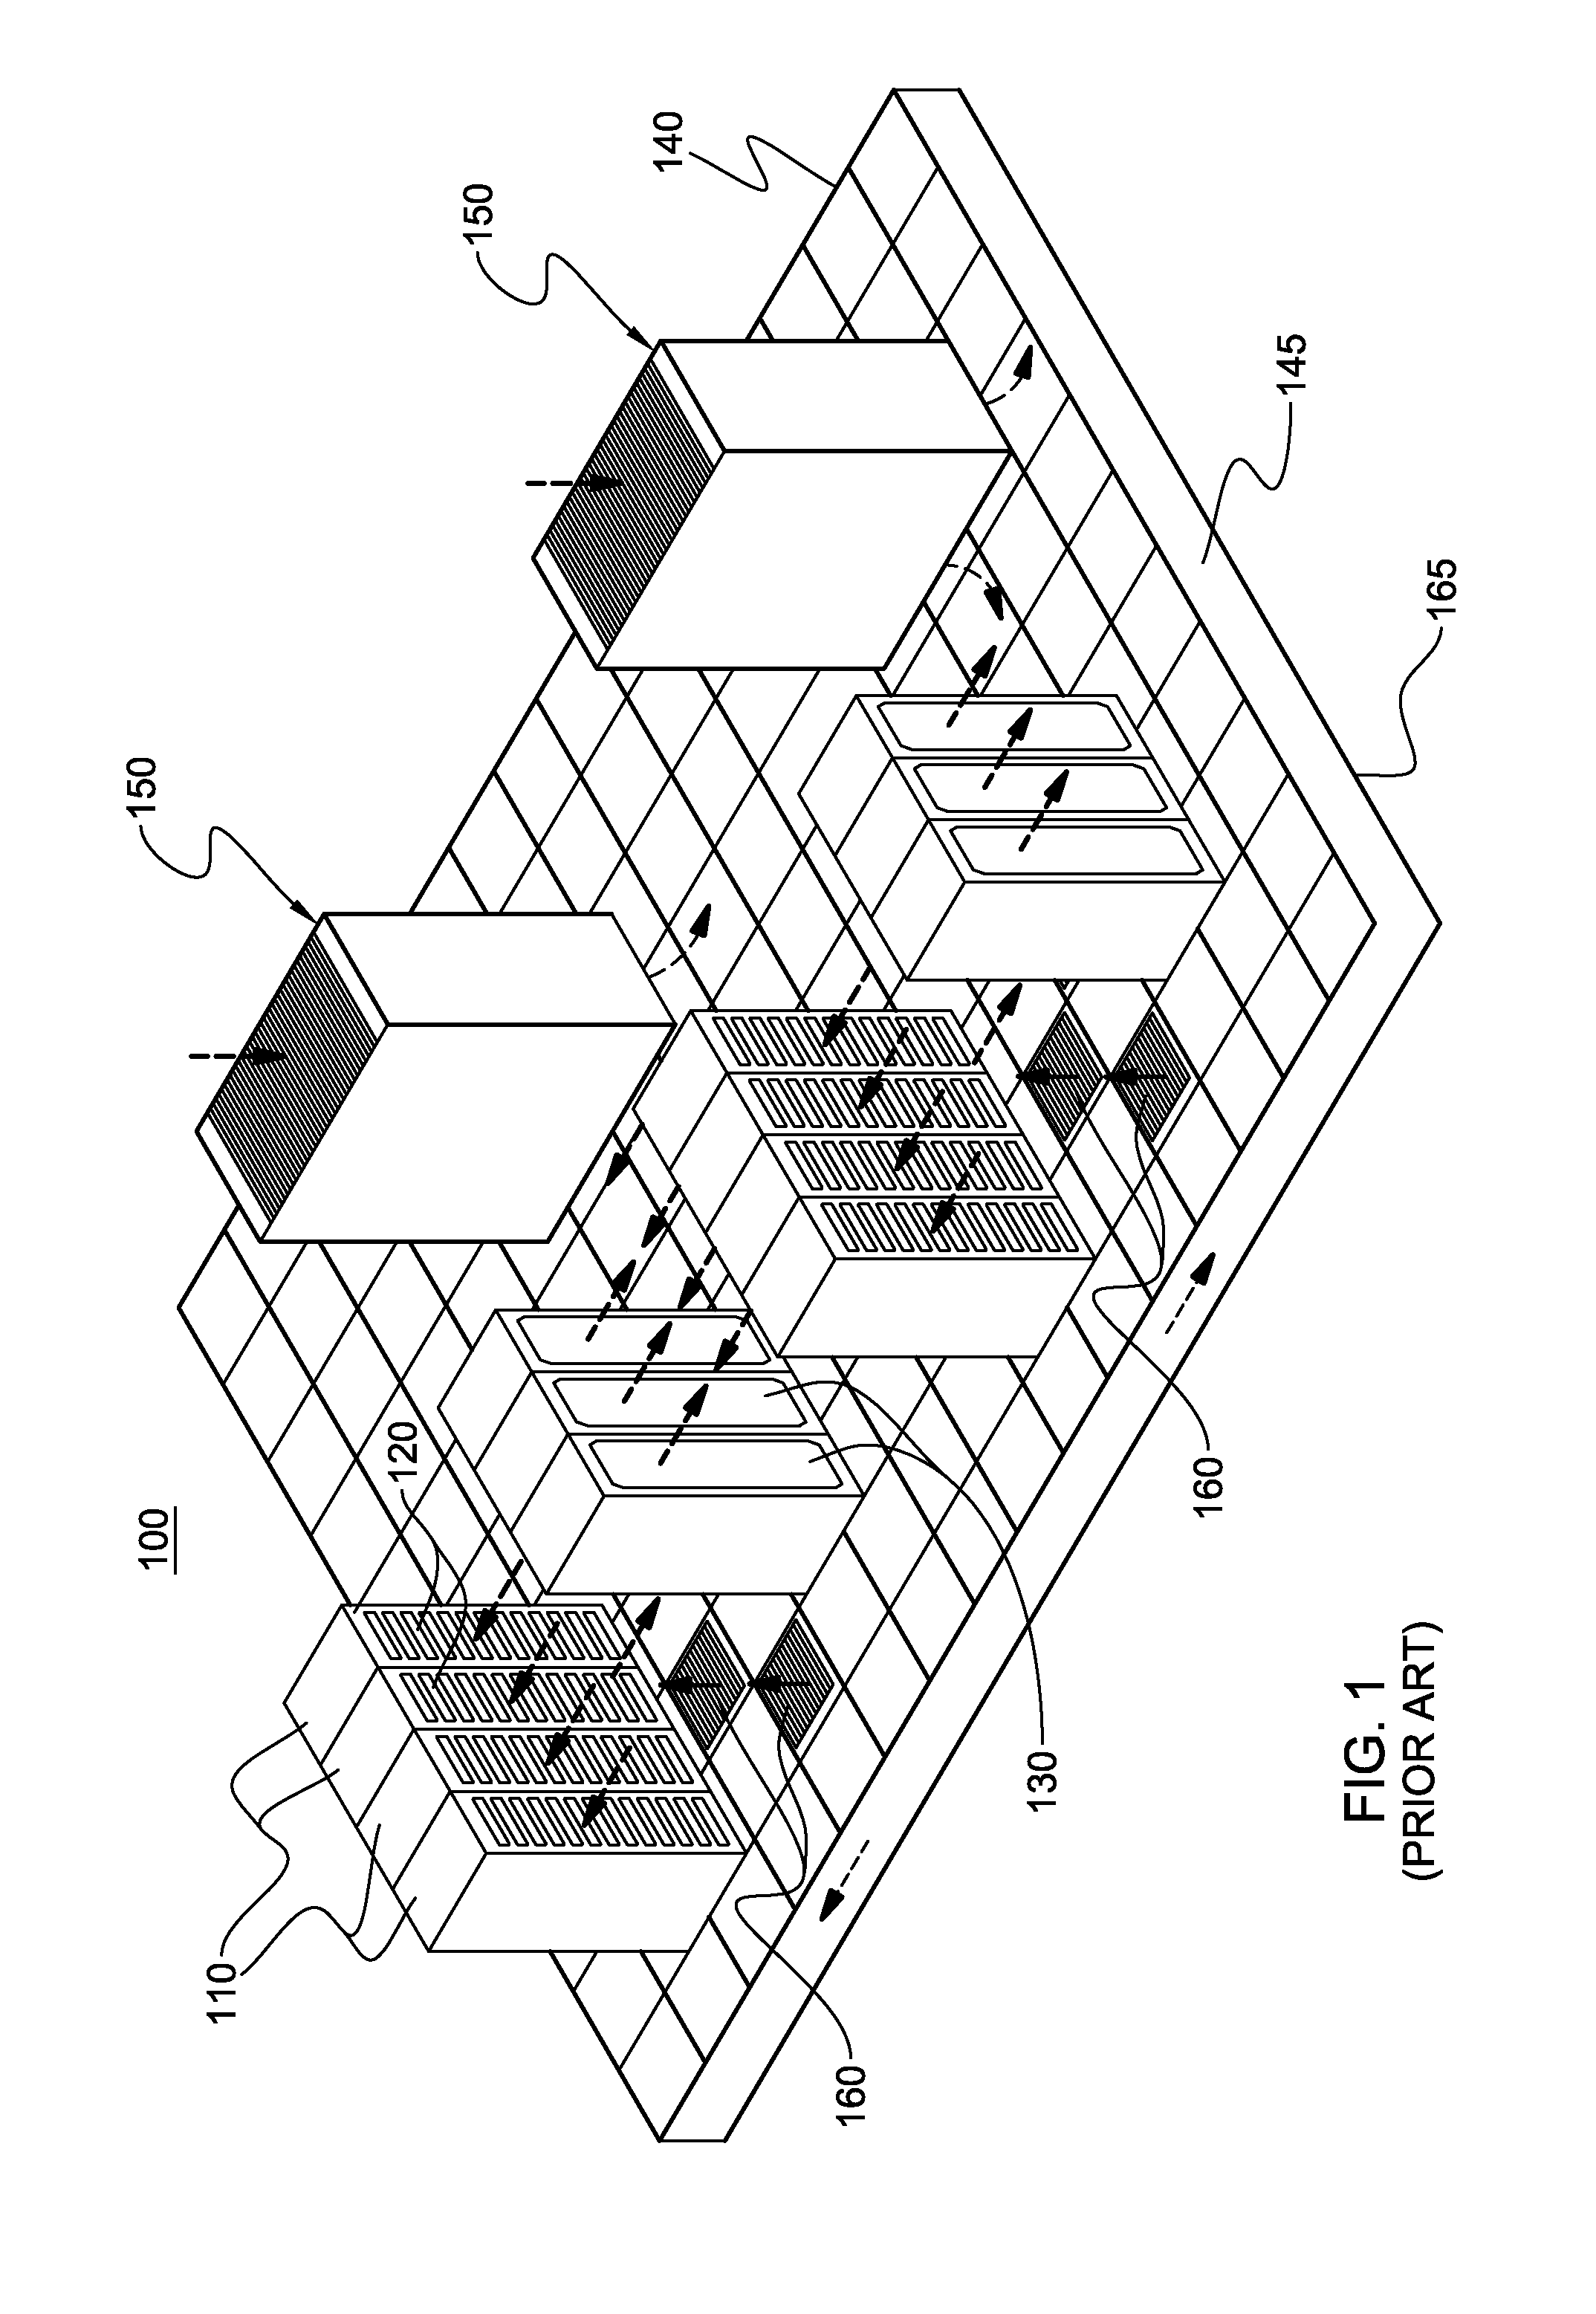 Liquid-cooled electronics rack with immersion-cooled electronic subsystems and vertically-mounted, vapor-condensing unit